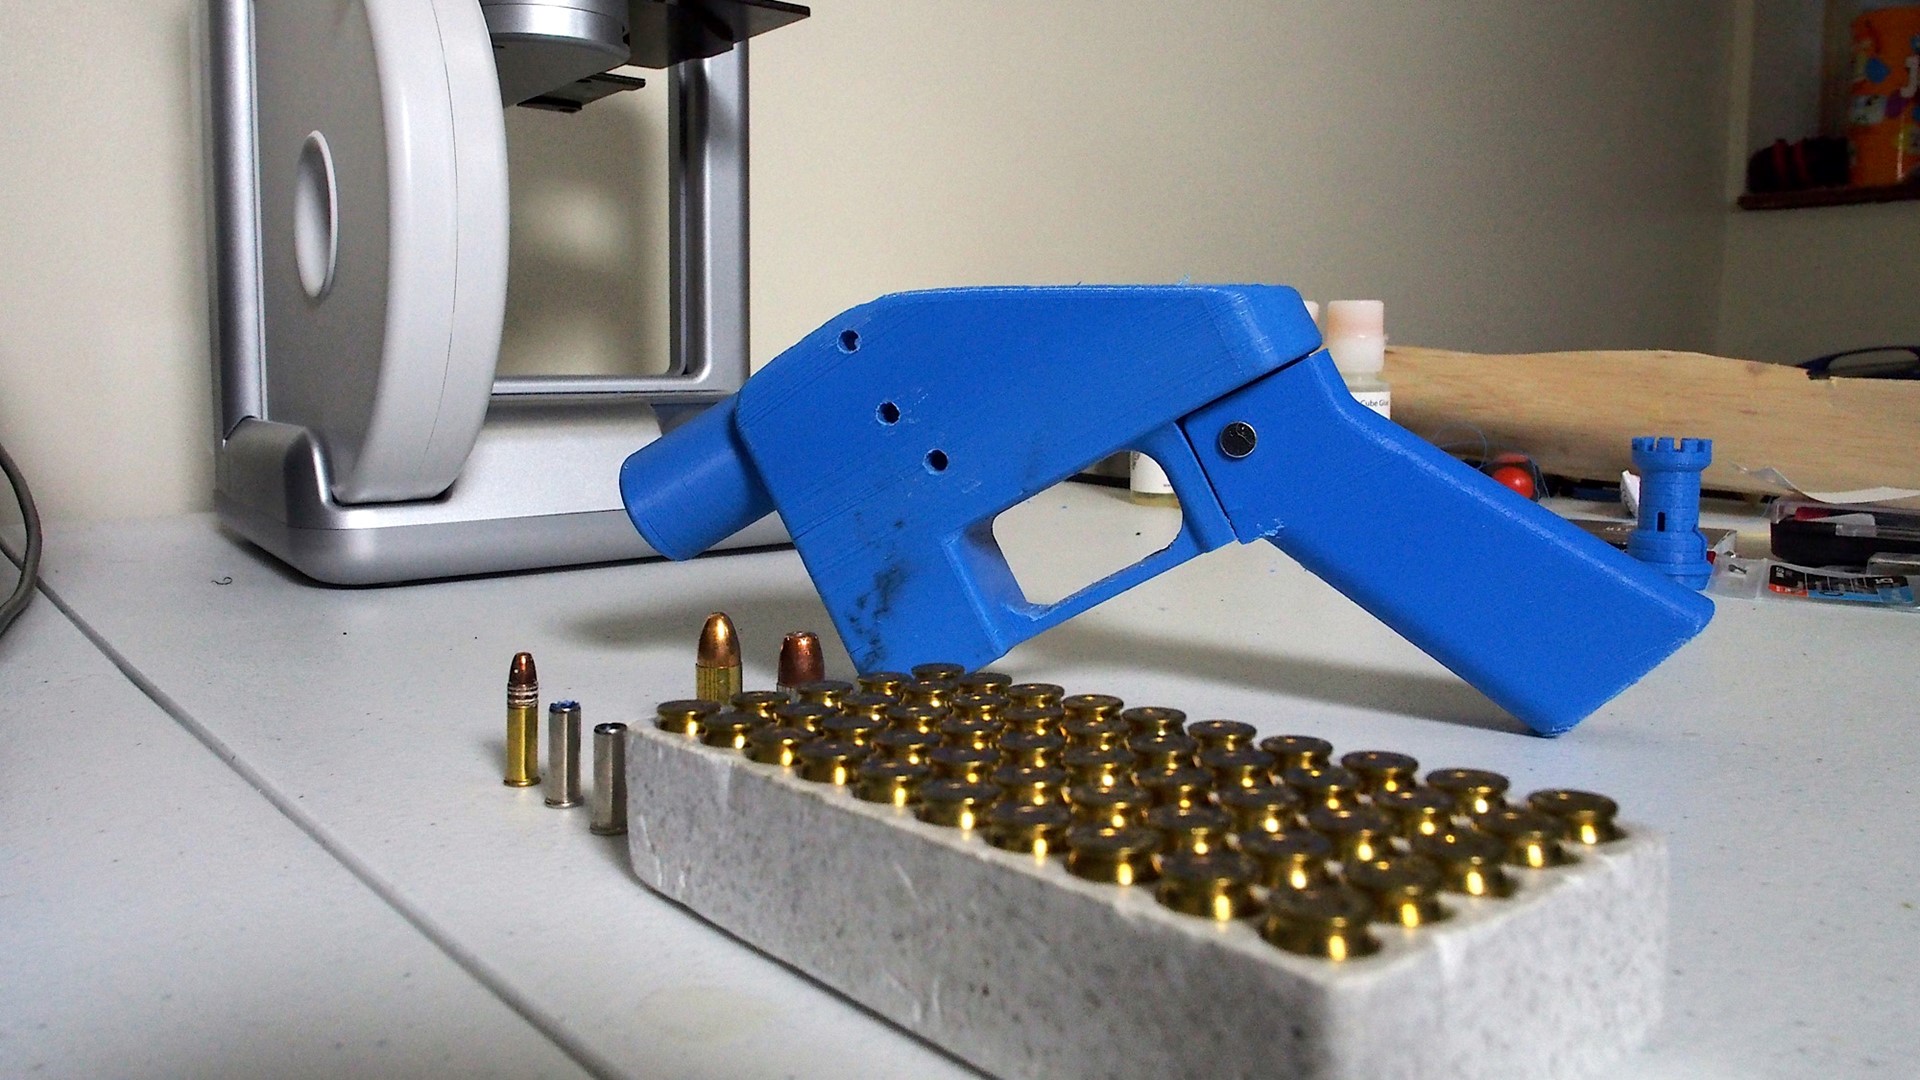 an-ar-15-made-at-home-with-3d-printing-the-downloadable-gun-becomes-available-august-1